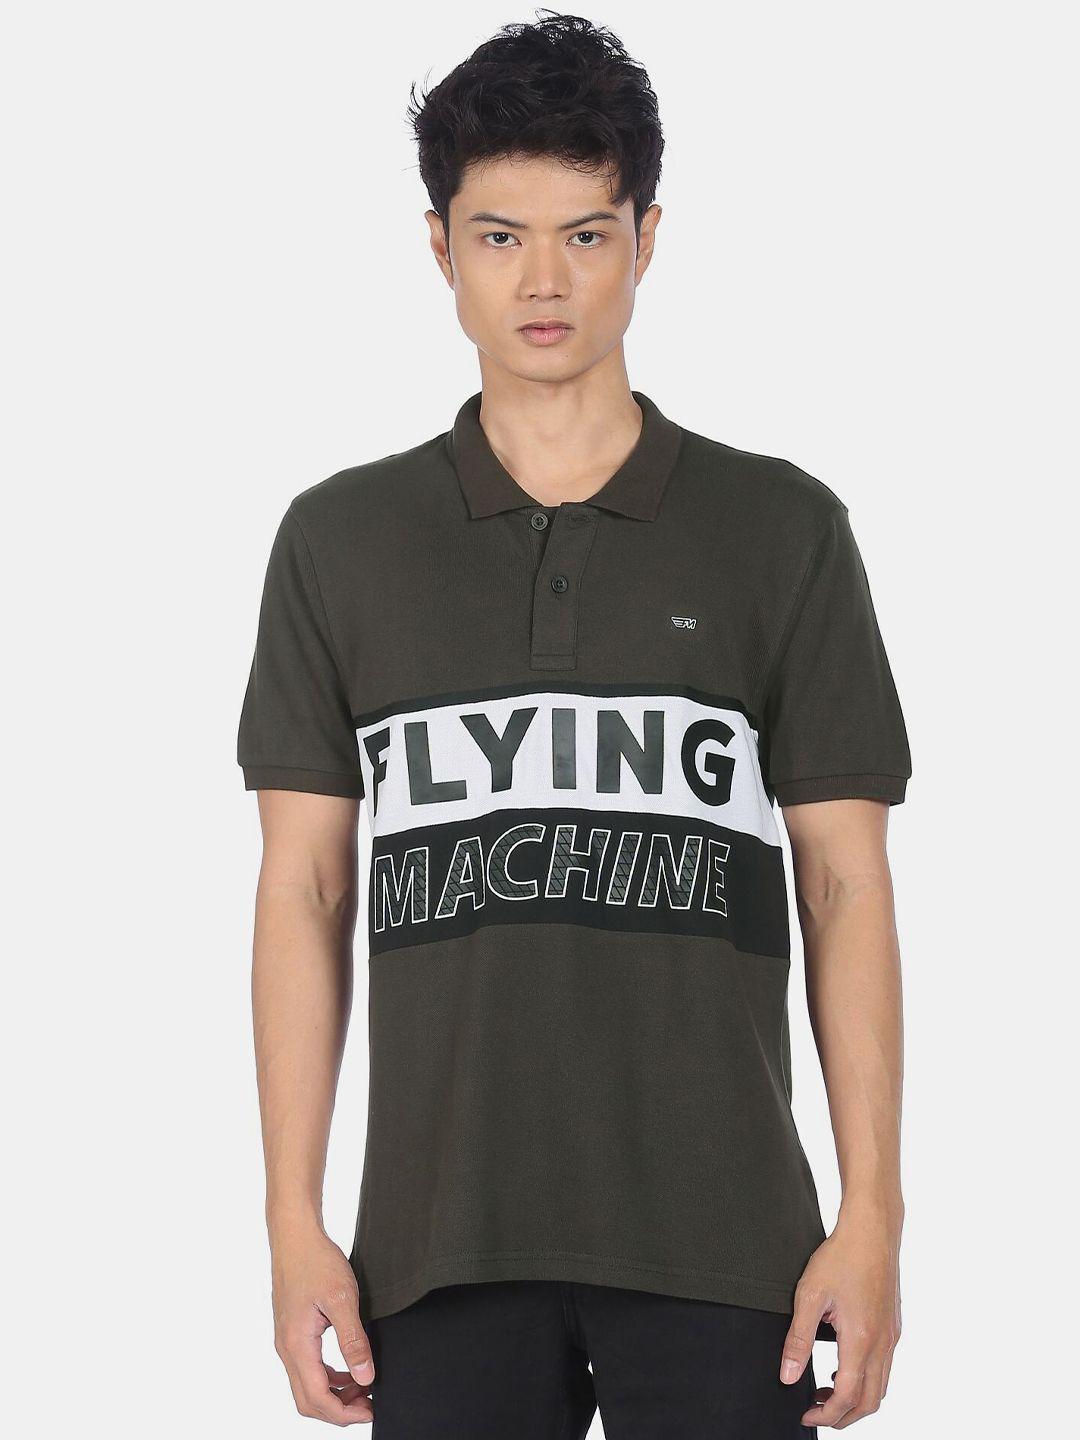 flying-machine-men-plus-size-charcoal-grey--&-white-typography-printed-cotton-t-shirt